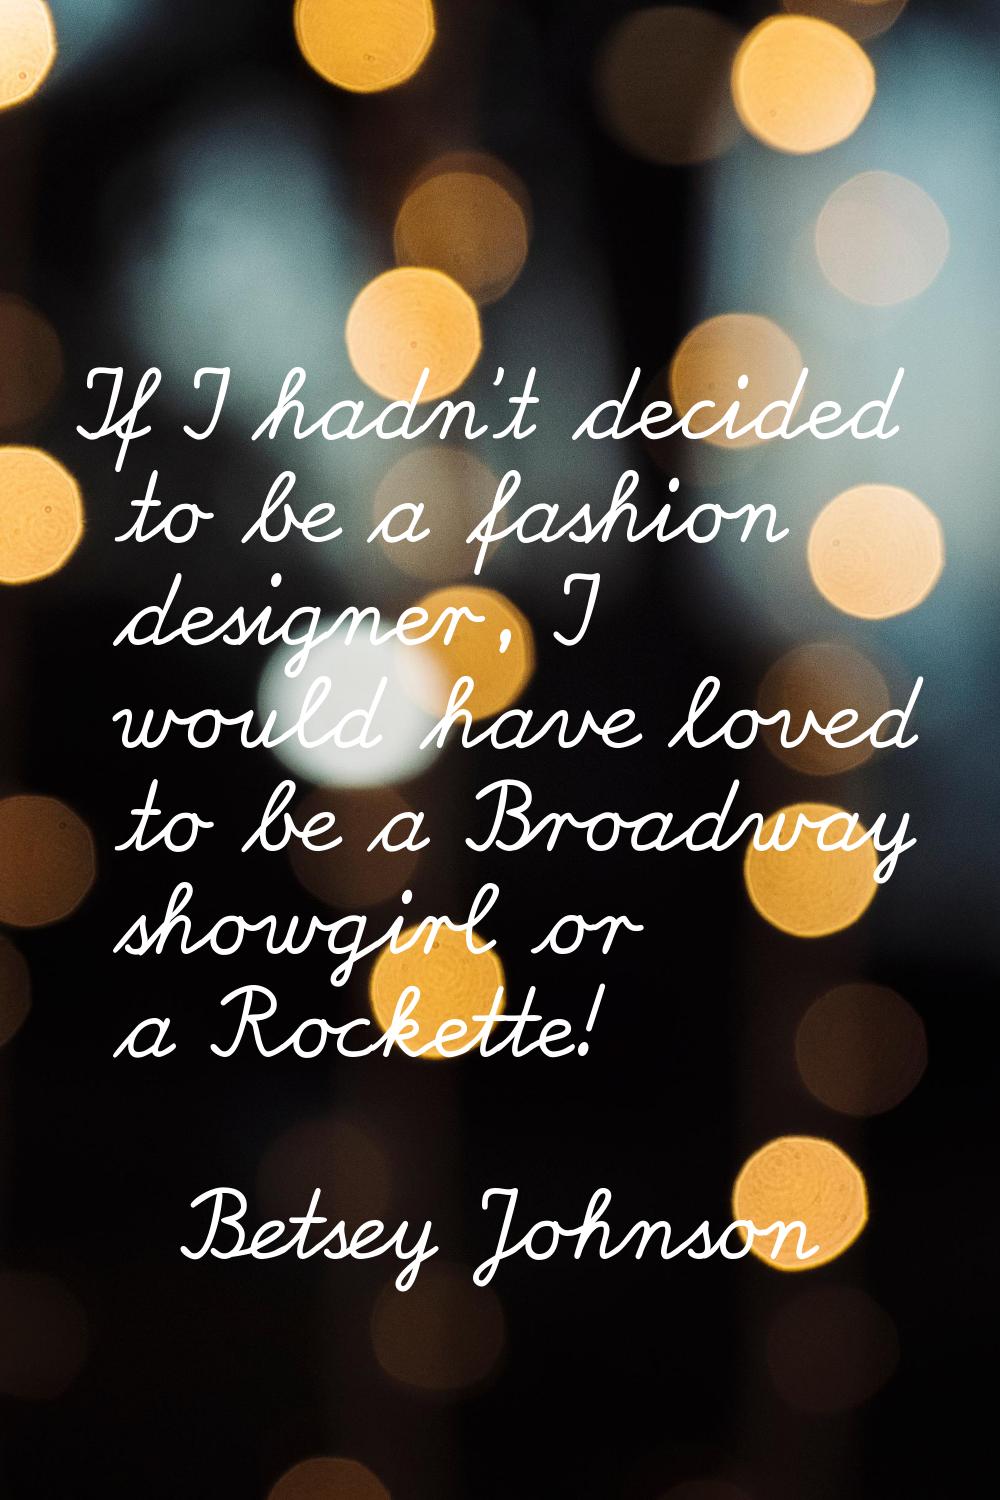 If I hadn't decided to be a fashion designer, I would have loved to be a Broadway showgirl or a Roc